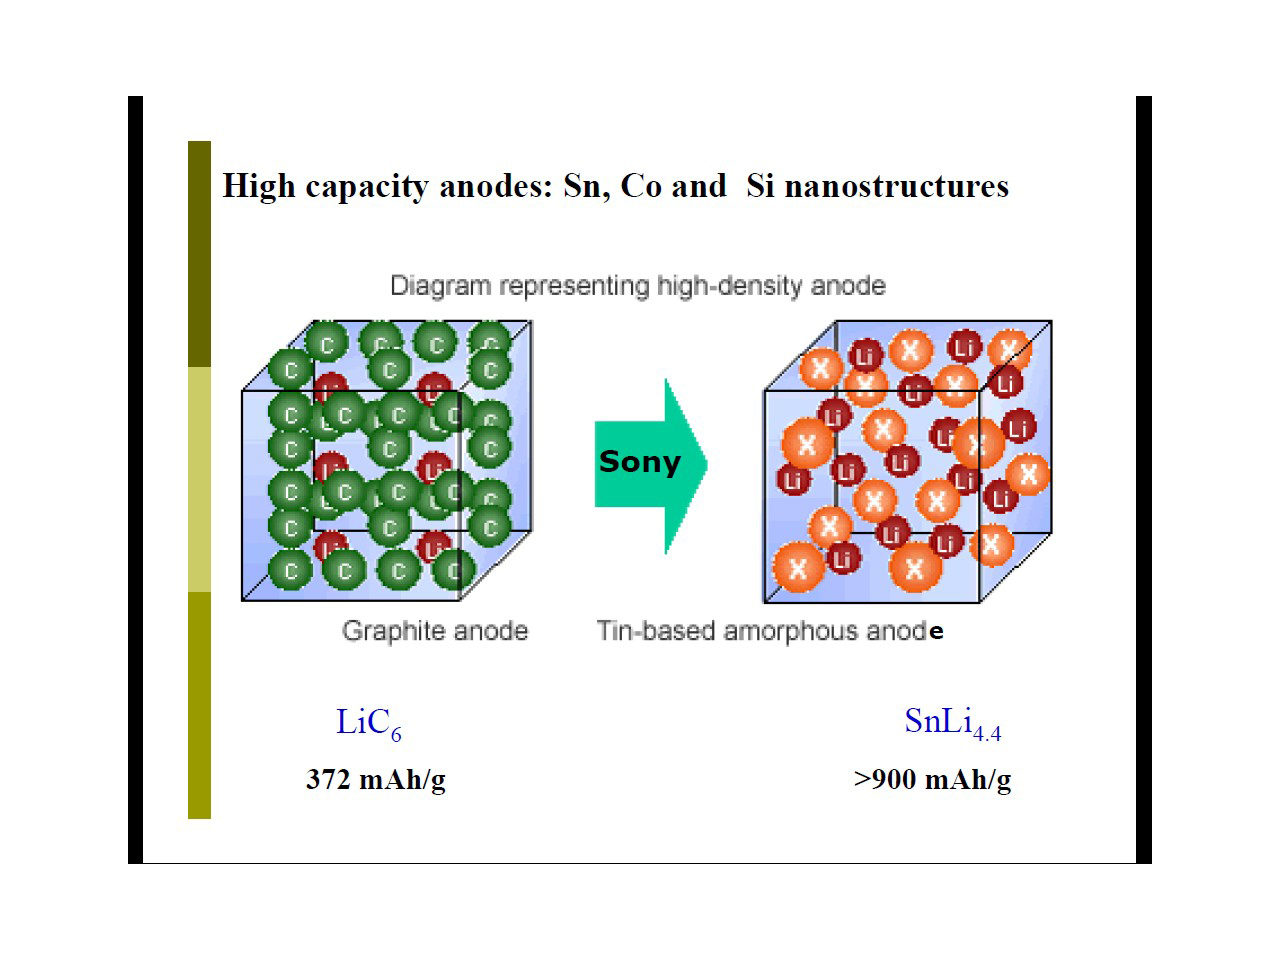 High capacity anodes: Sn, Co and Si nanostructures